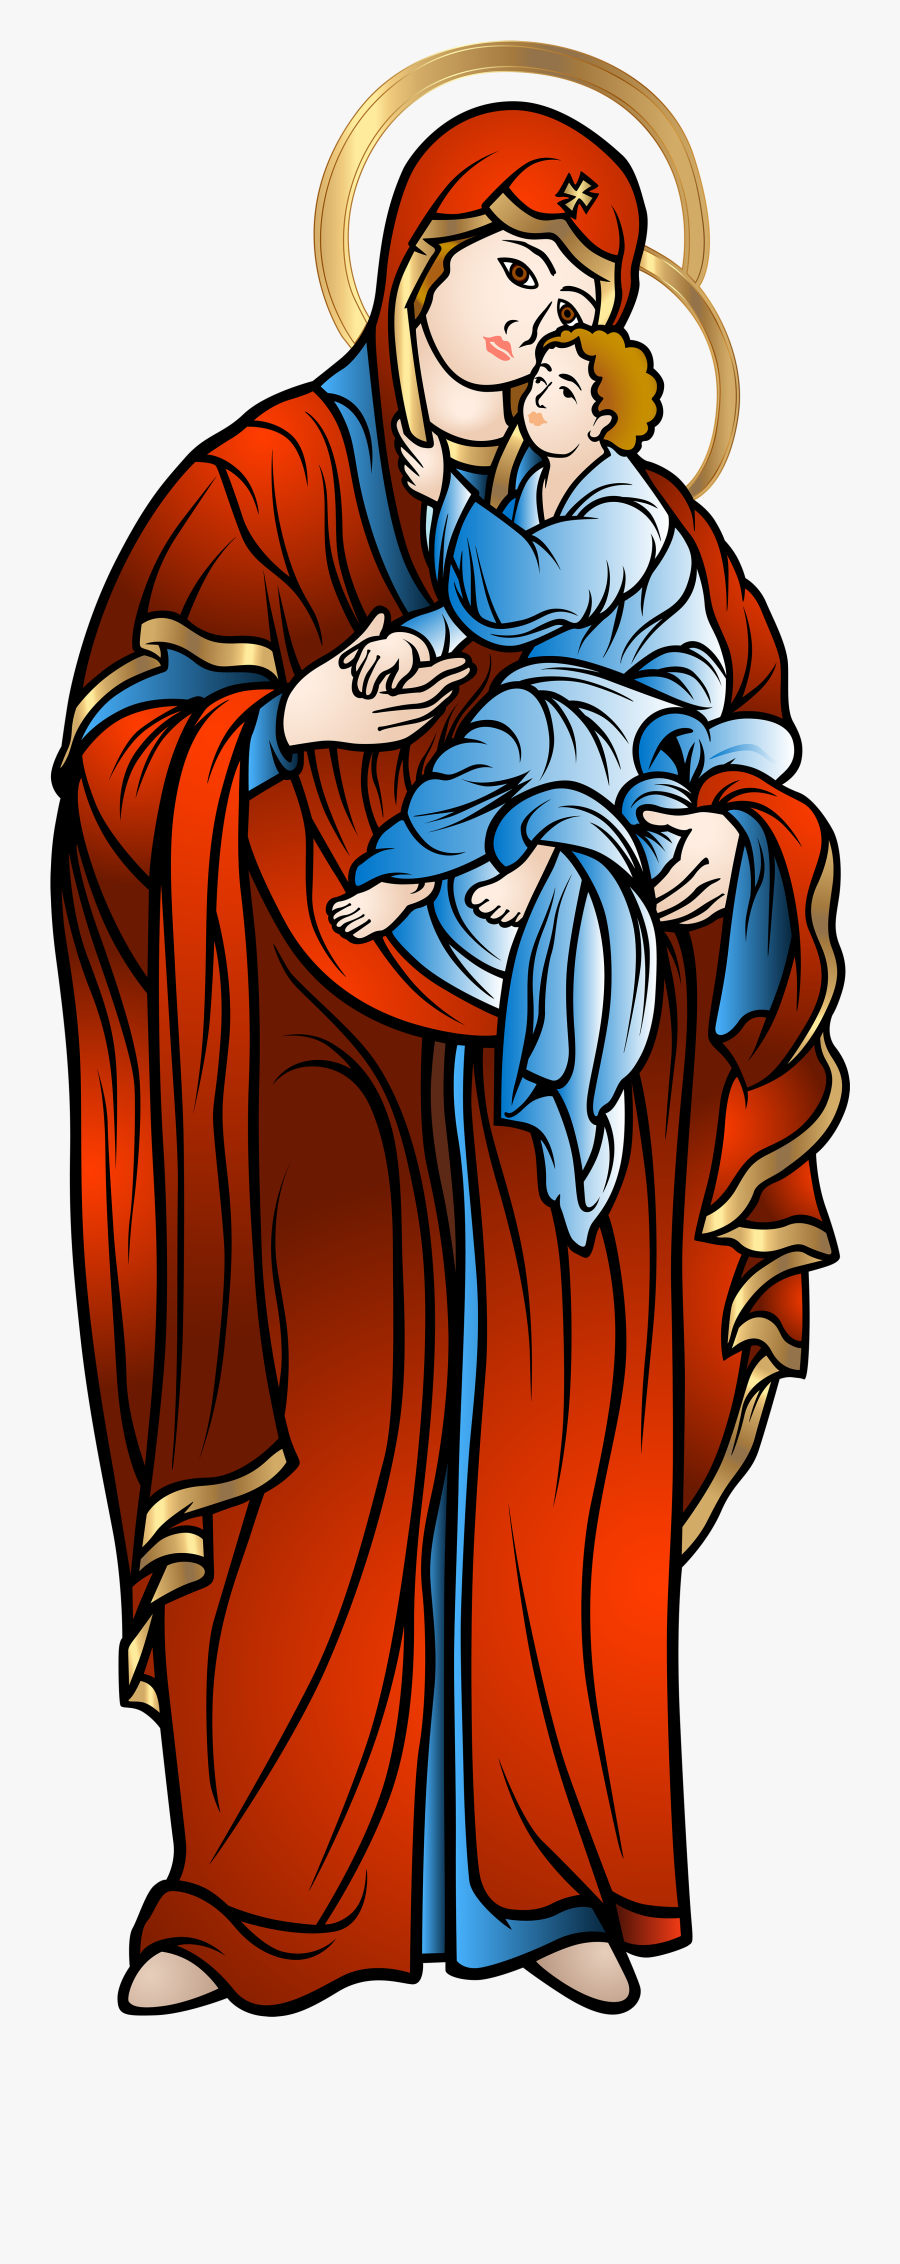 Transparent Virgin Mary Png - Virgin Mary Hd Png, Transparent Clipart